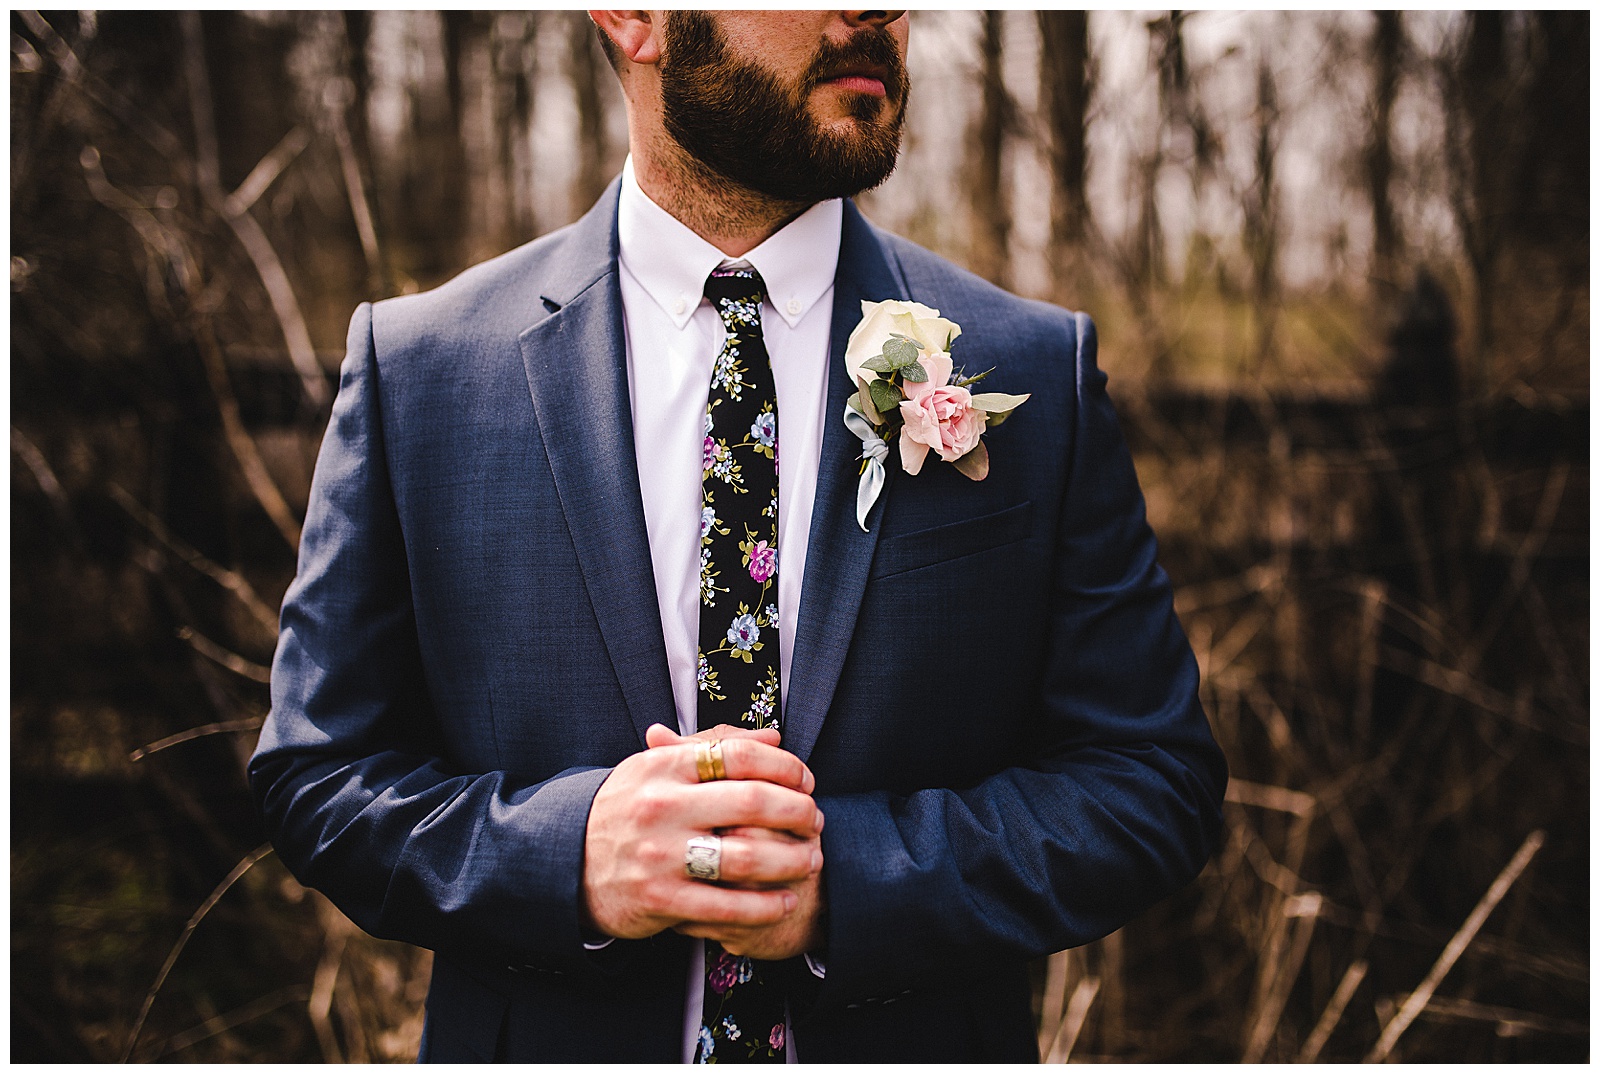 Boho chic details for the groomsman on the wedding day. 